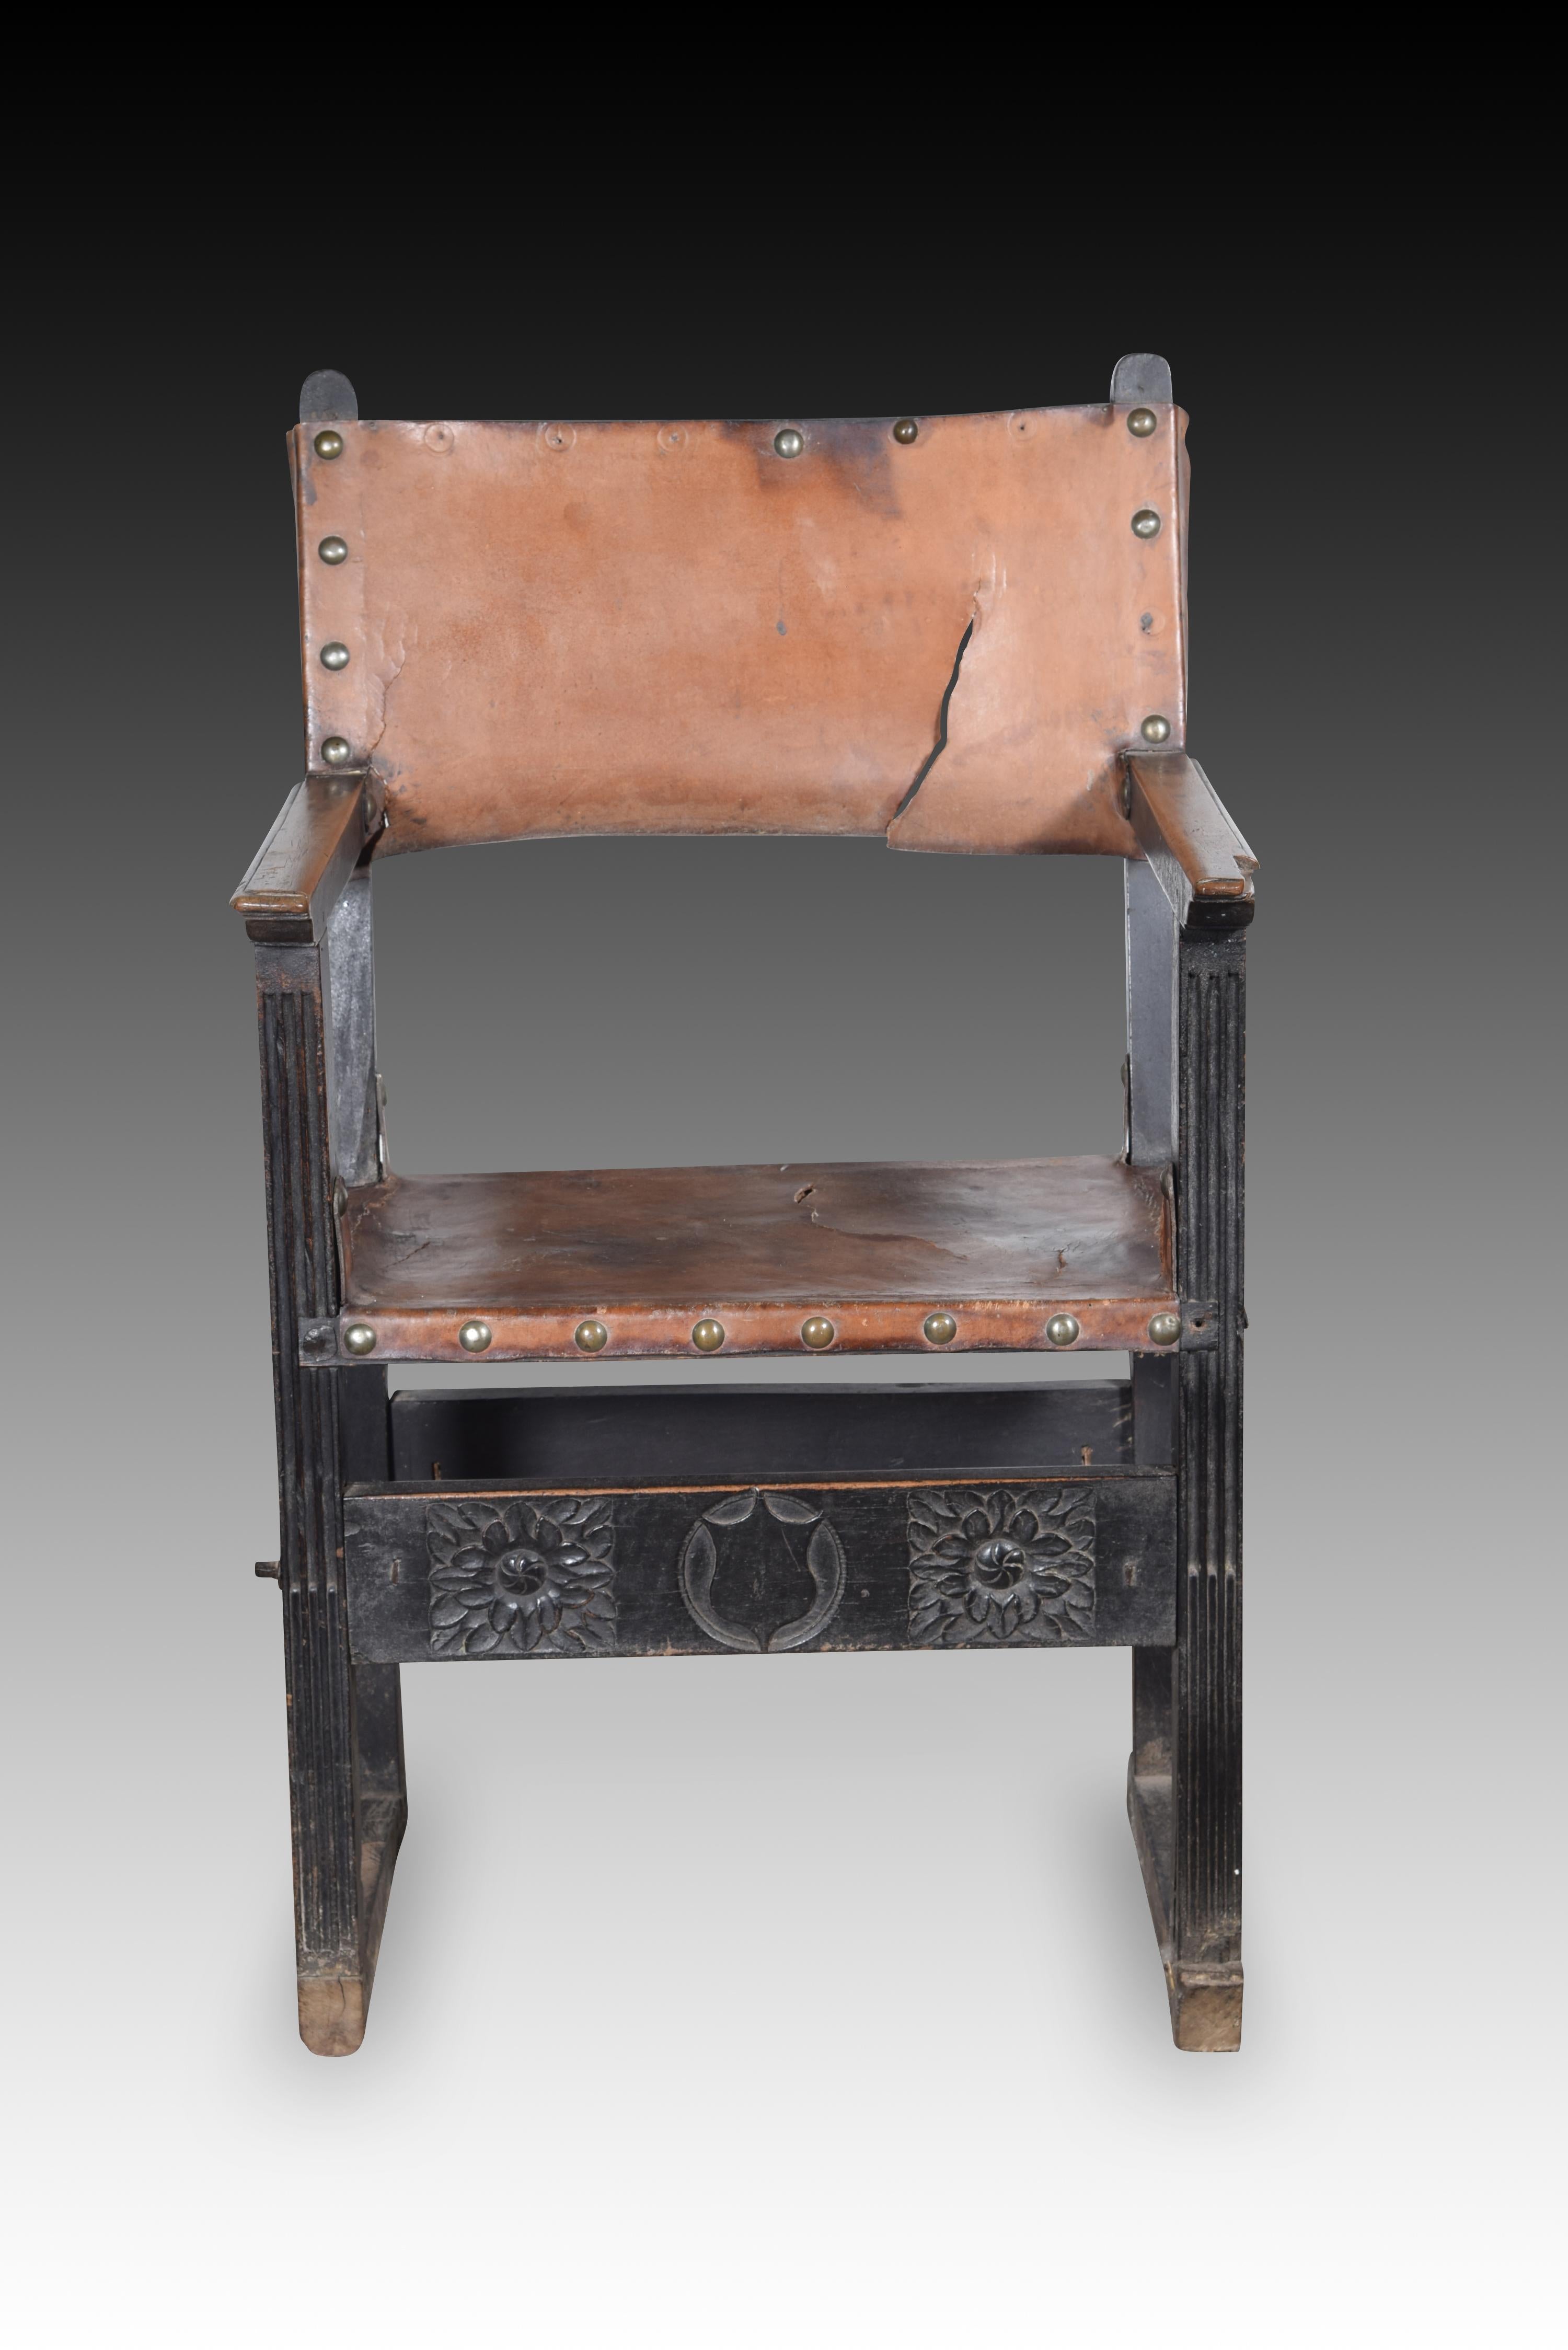 Friar armchair. Walnut wood, leather. Spain, 16th century. 
Armchair with arms and high back of the type known as “frailero”, which has leather with studs on the seat and upper part of the back, very low chambrances joining the front legs with the